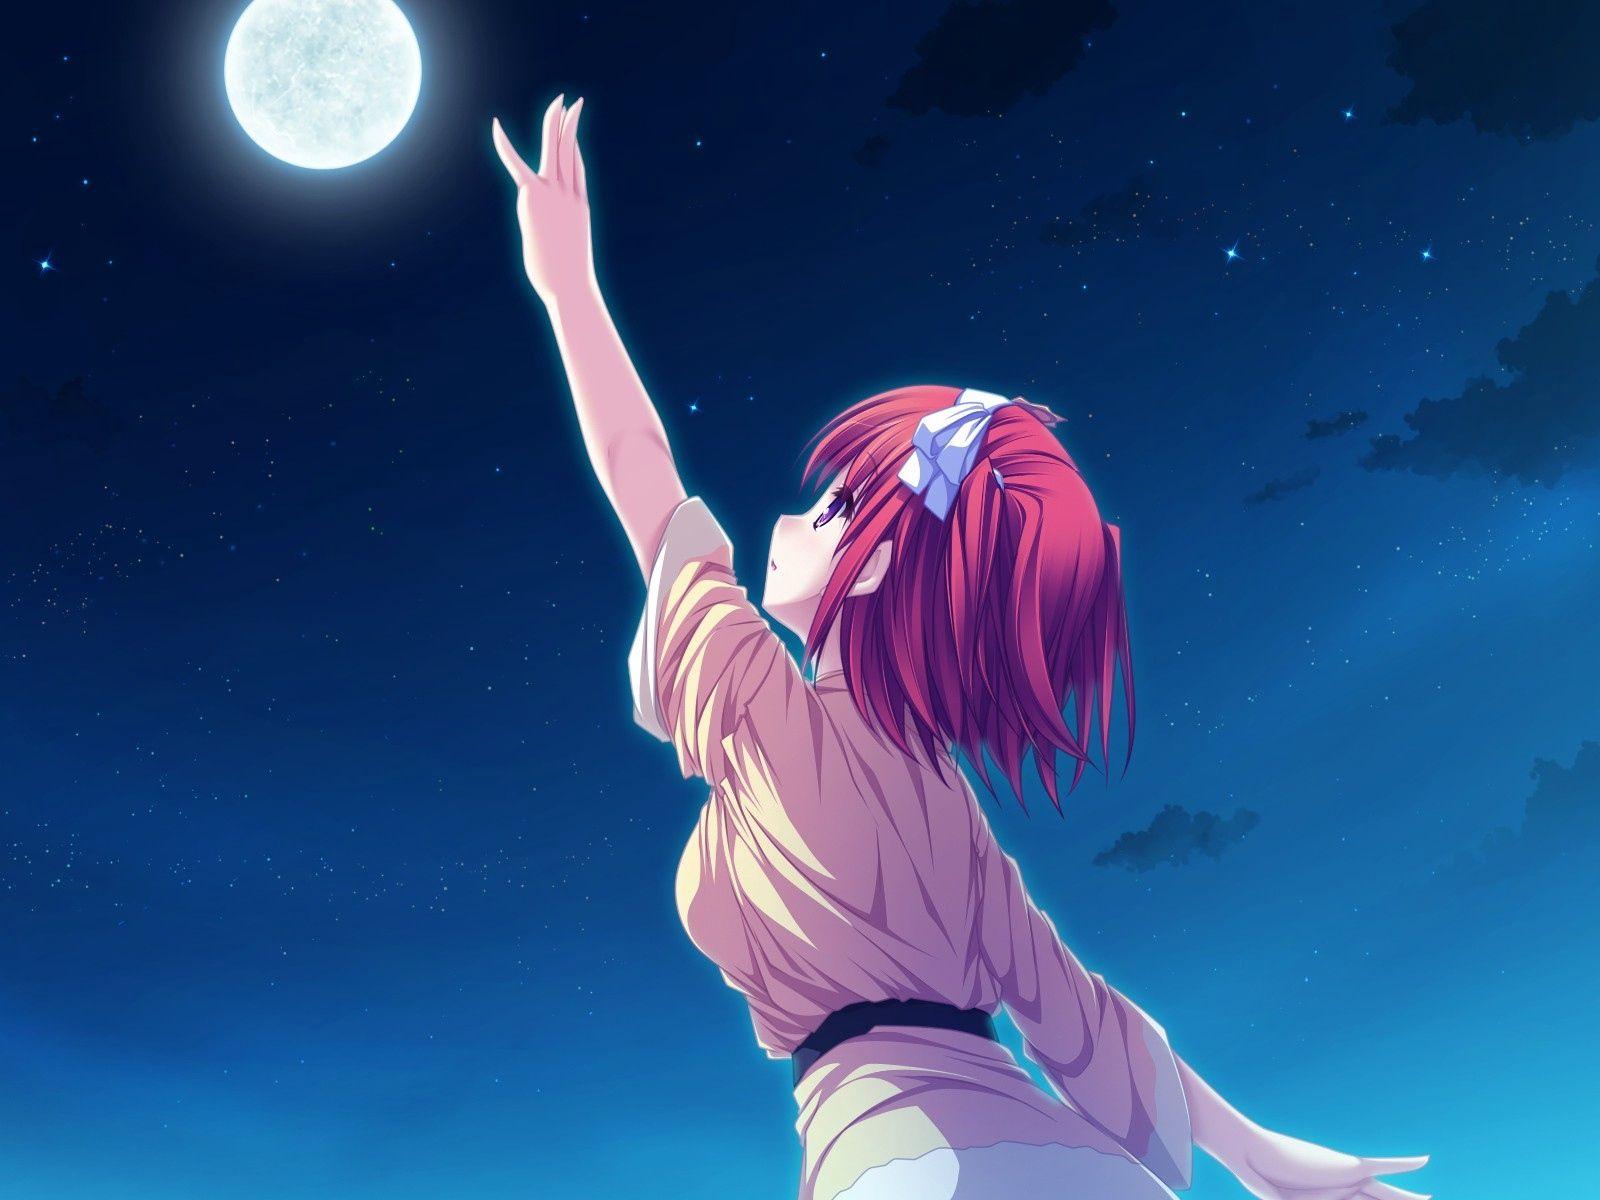 Anime Girl Looking At The Moon